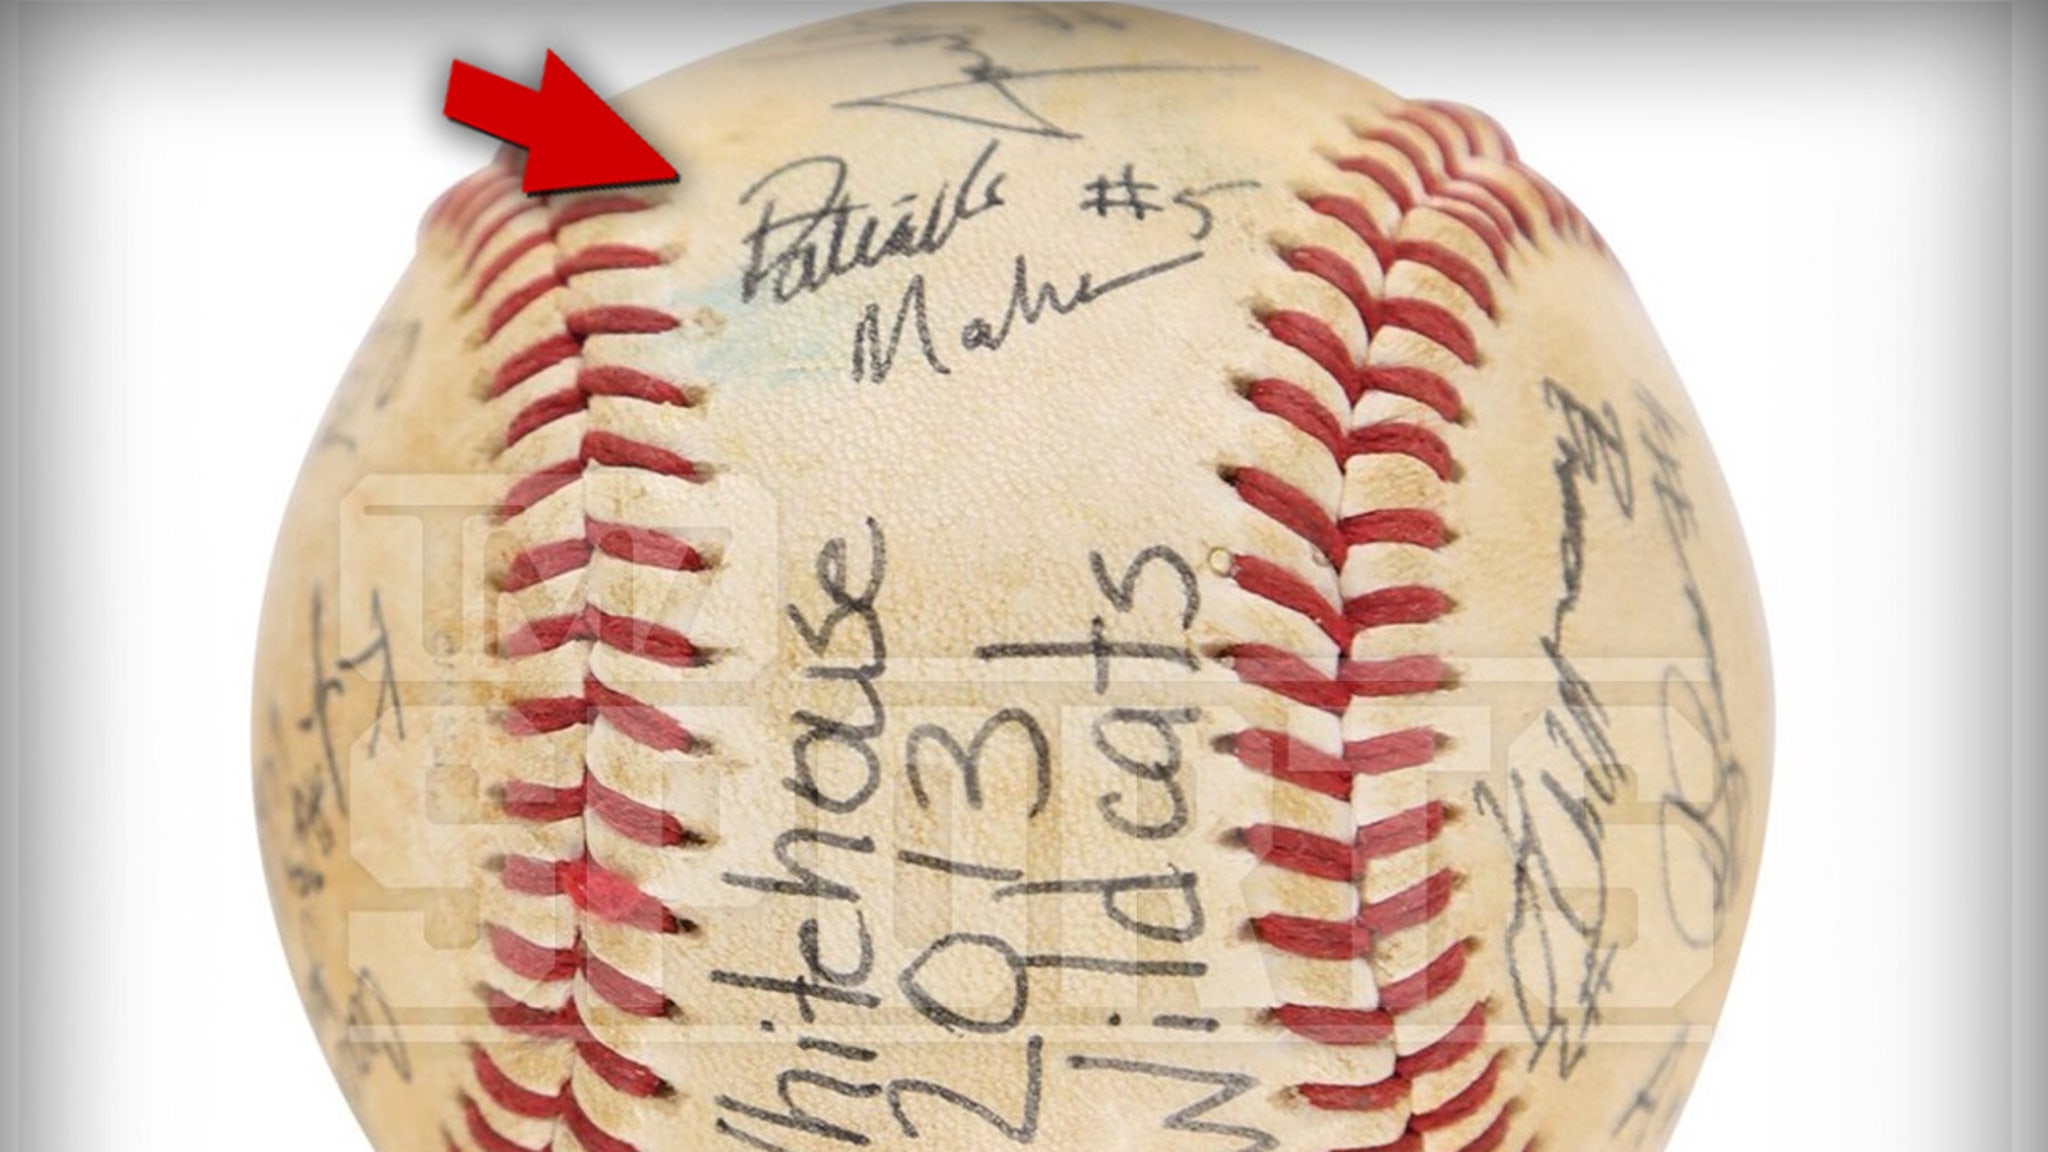 Patrick Mahomes Baseball Autographed In H.S. Hits Auction, 2013 Signature!